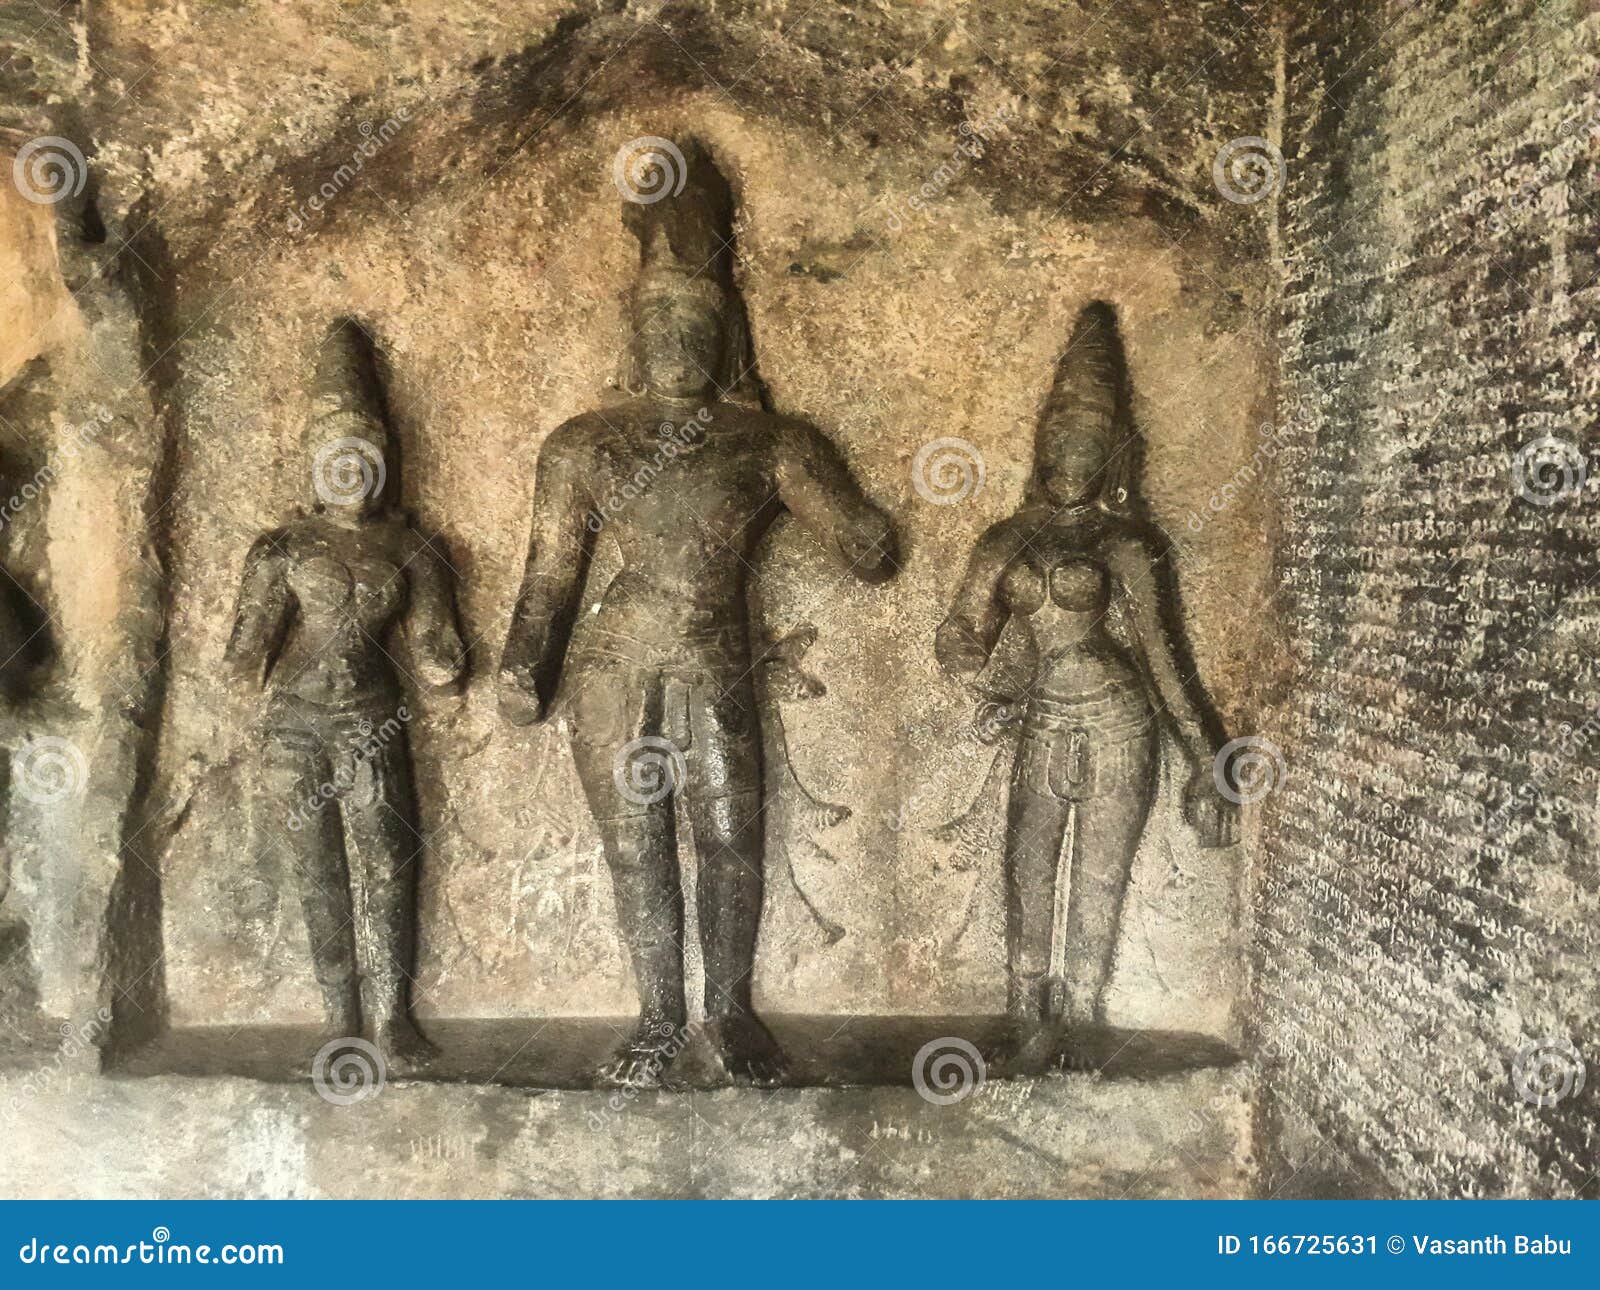 statues engraved in a temple in tamil nadu india. the temle nam is rock cut cave temple